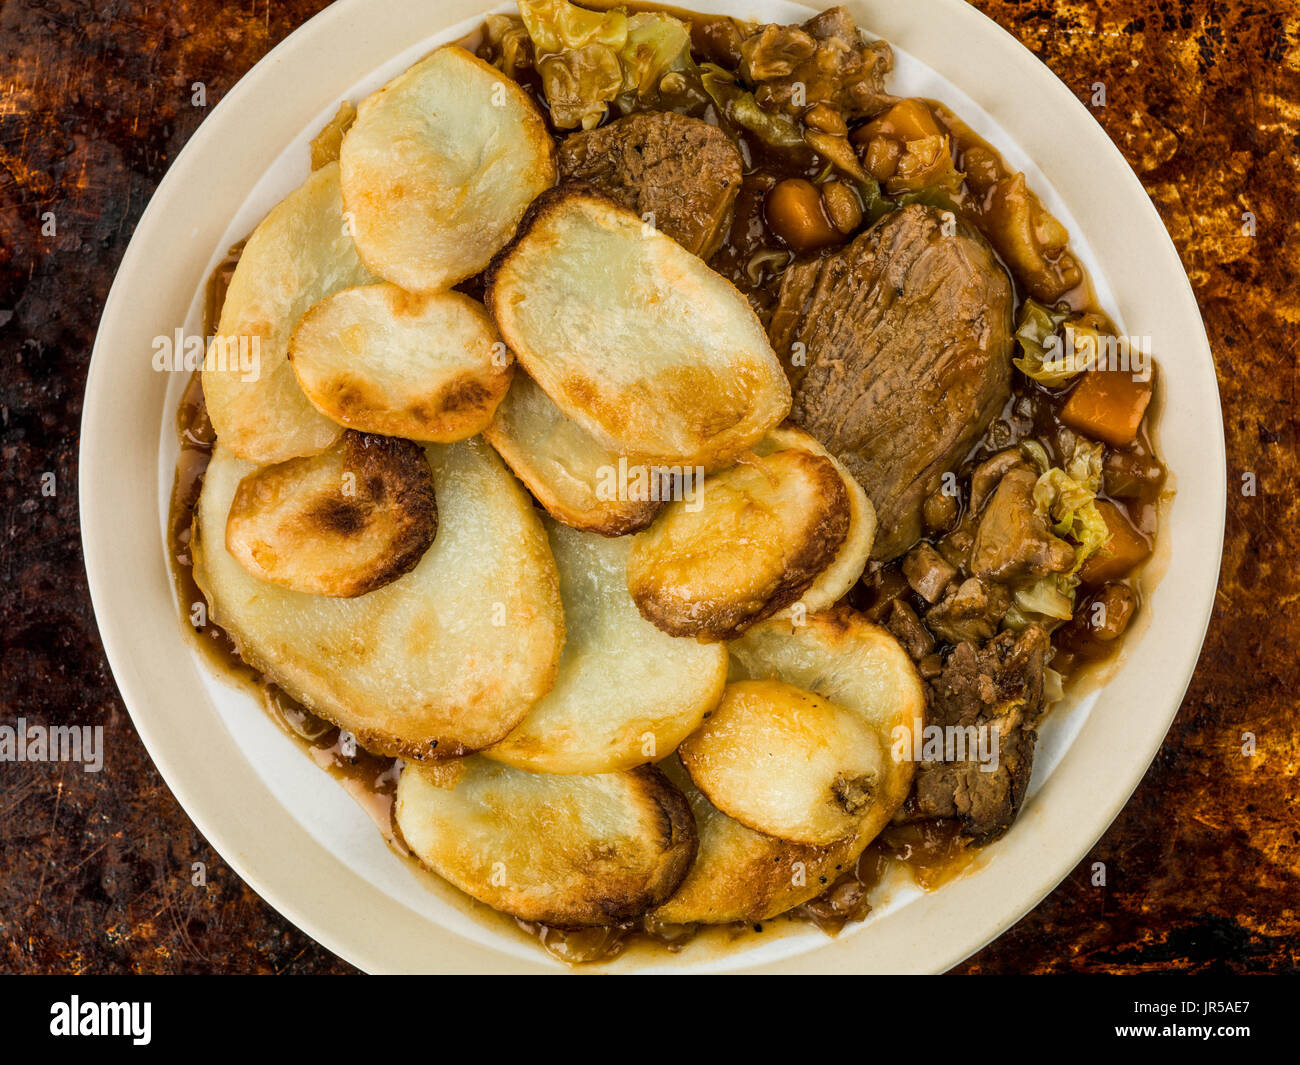 Lamb Hotpot With Sliced Potatoes and Onion Gravy Against a Distressed Burnt Oven or Baking Tray Stock Photo